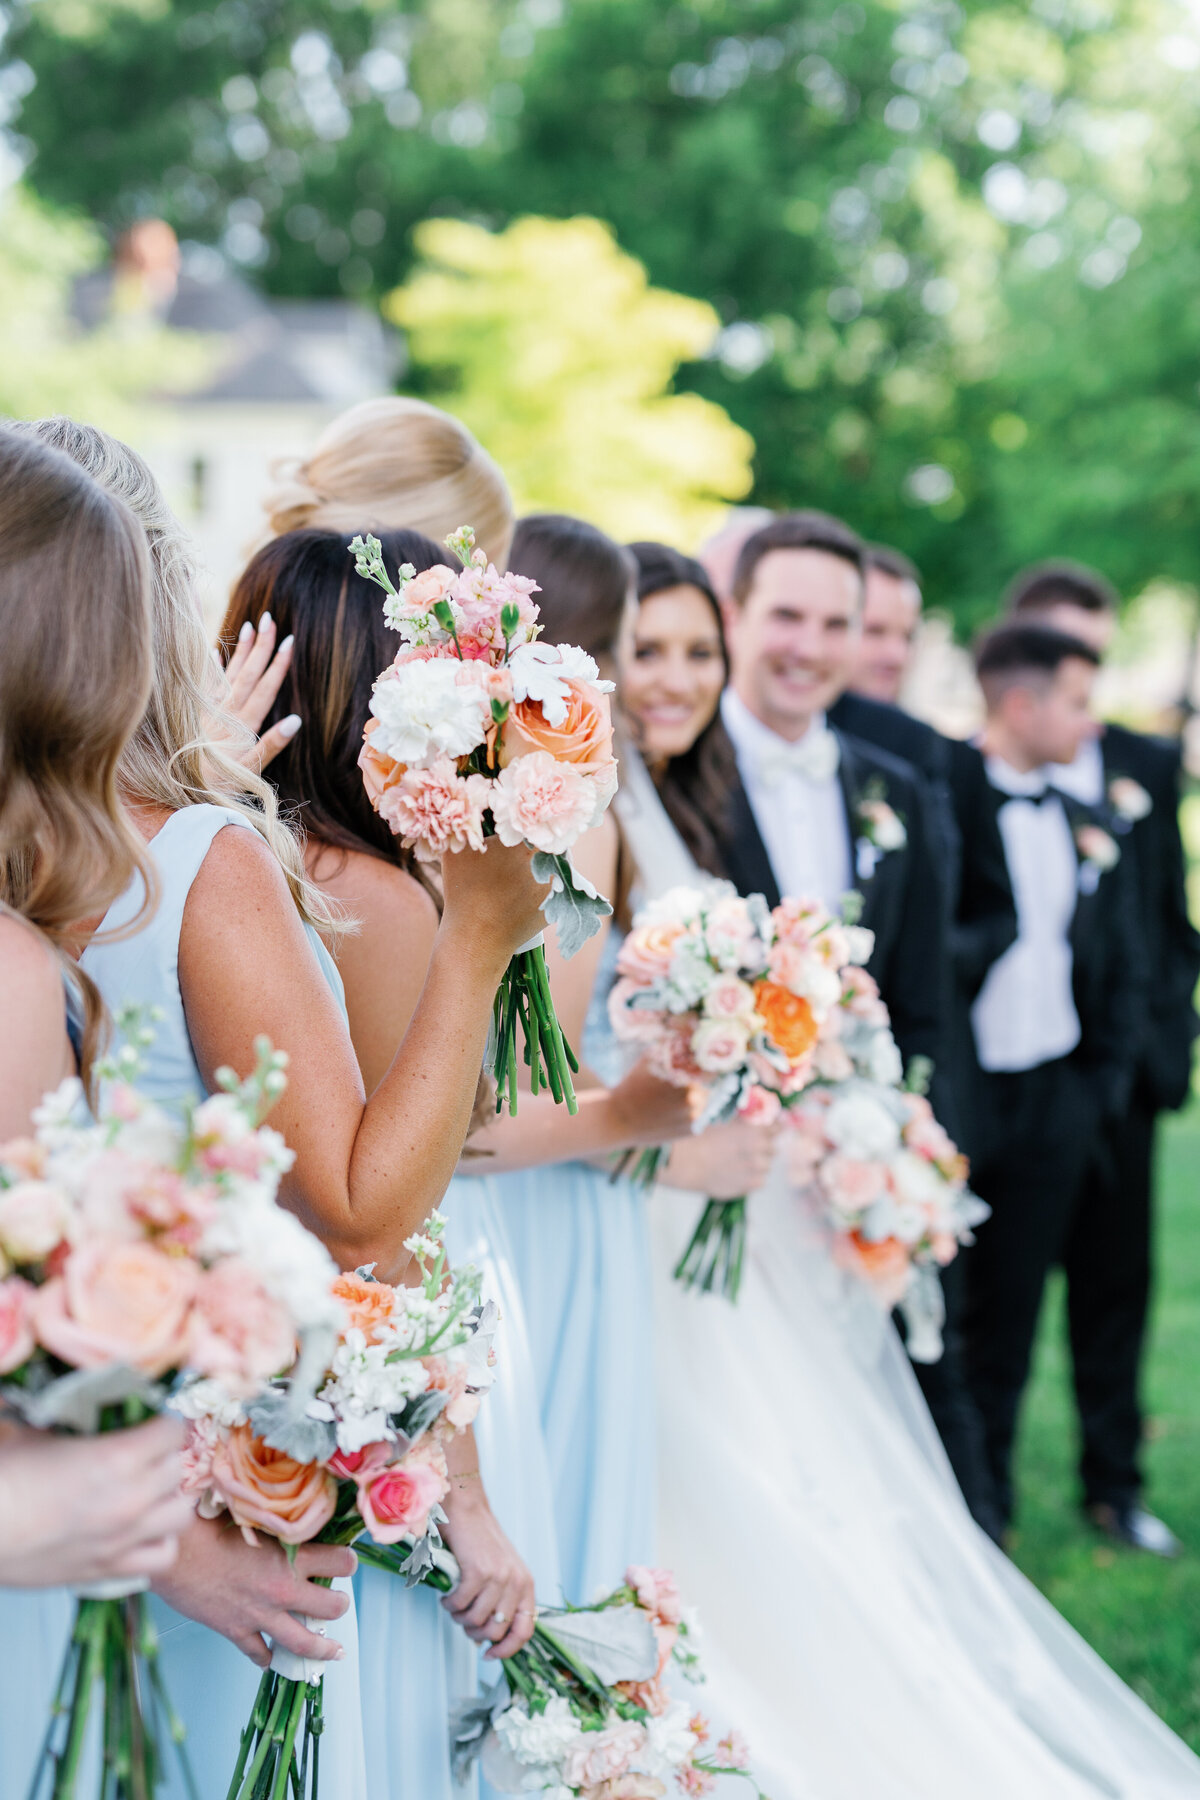 Ellen and Austin - Lee Chapel and Black Fox Farms - Bridal Party- East Tennessee Photographer - Alaina René Photography-103